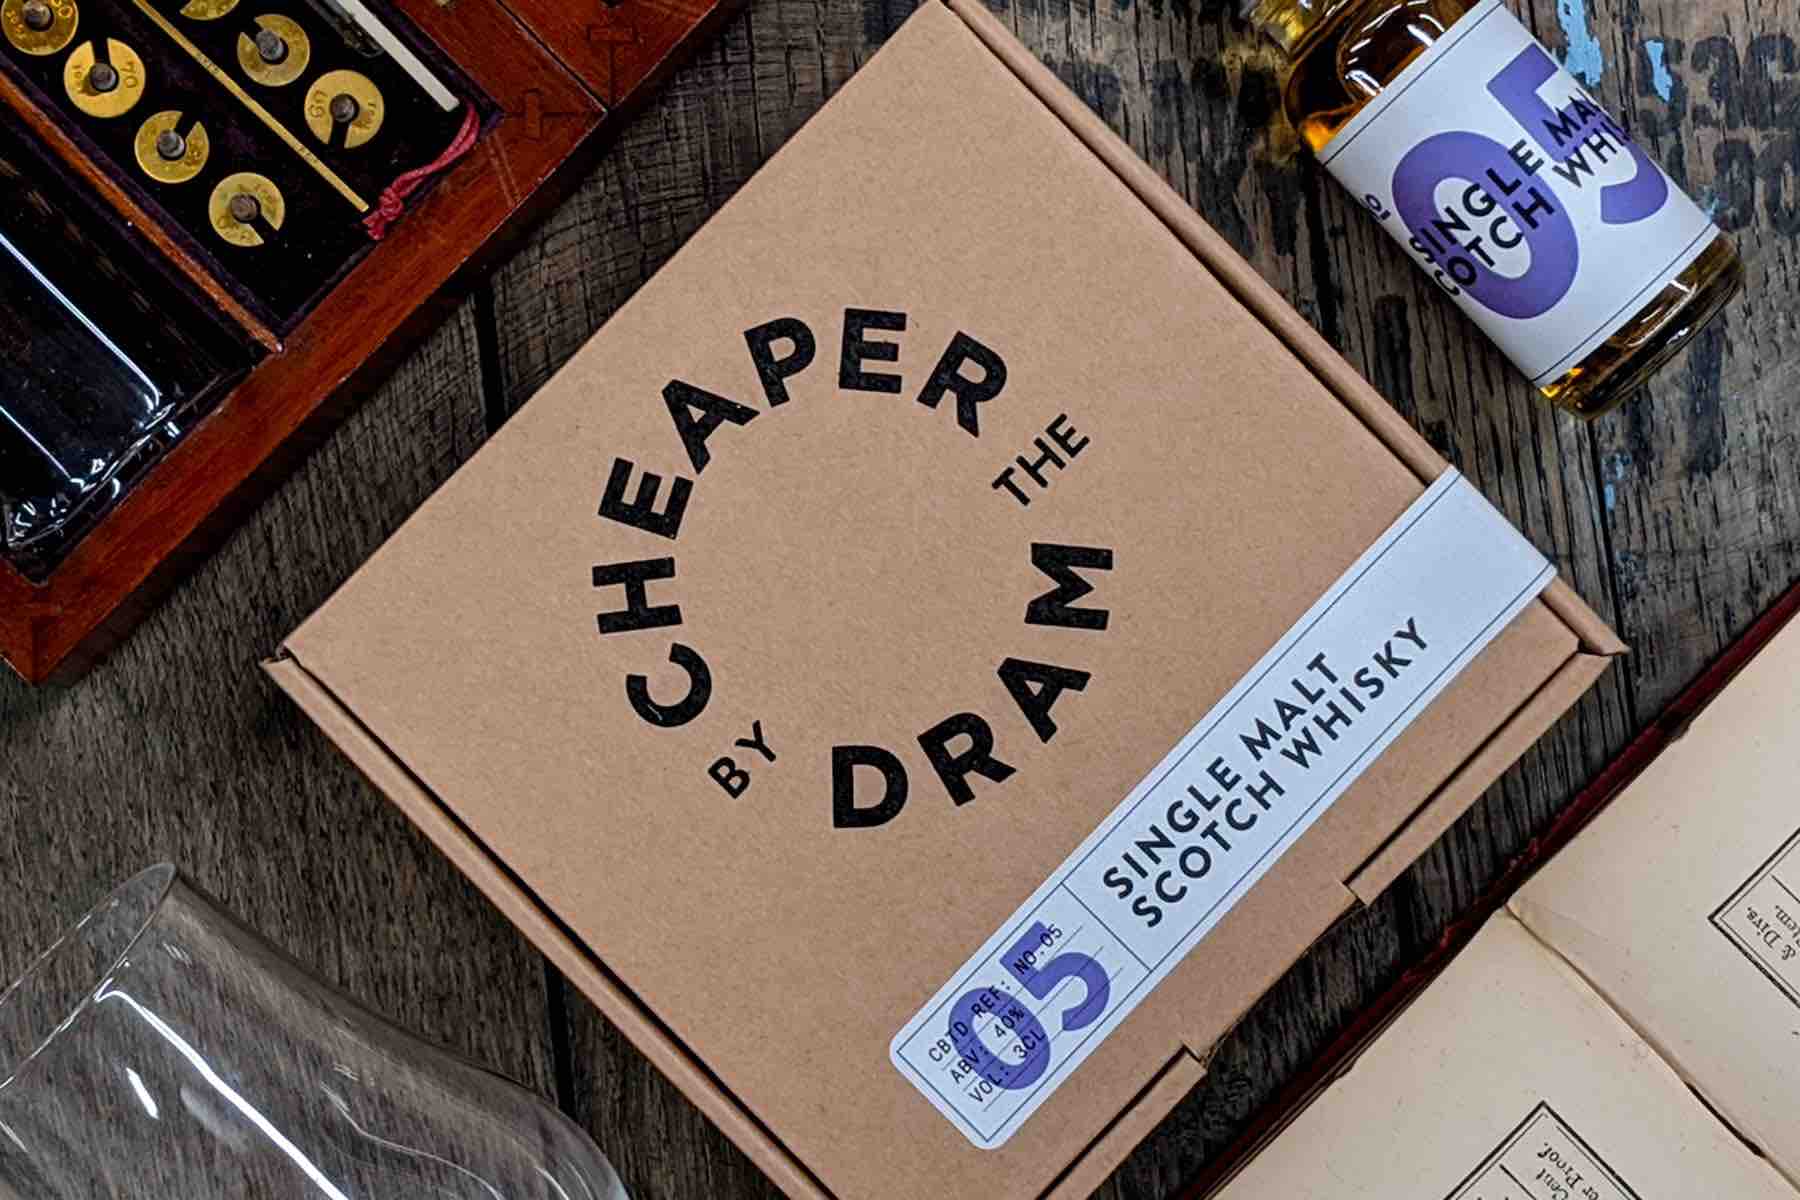 Cheaper By The Dram whisky samples